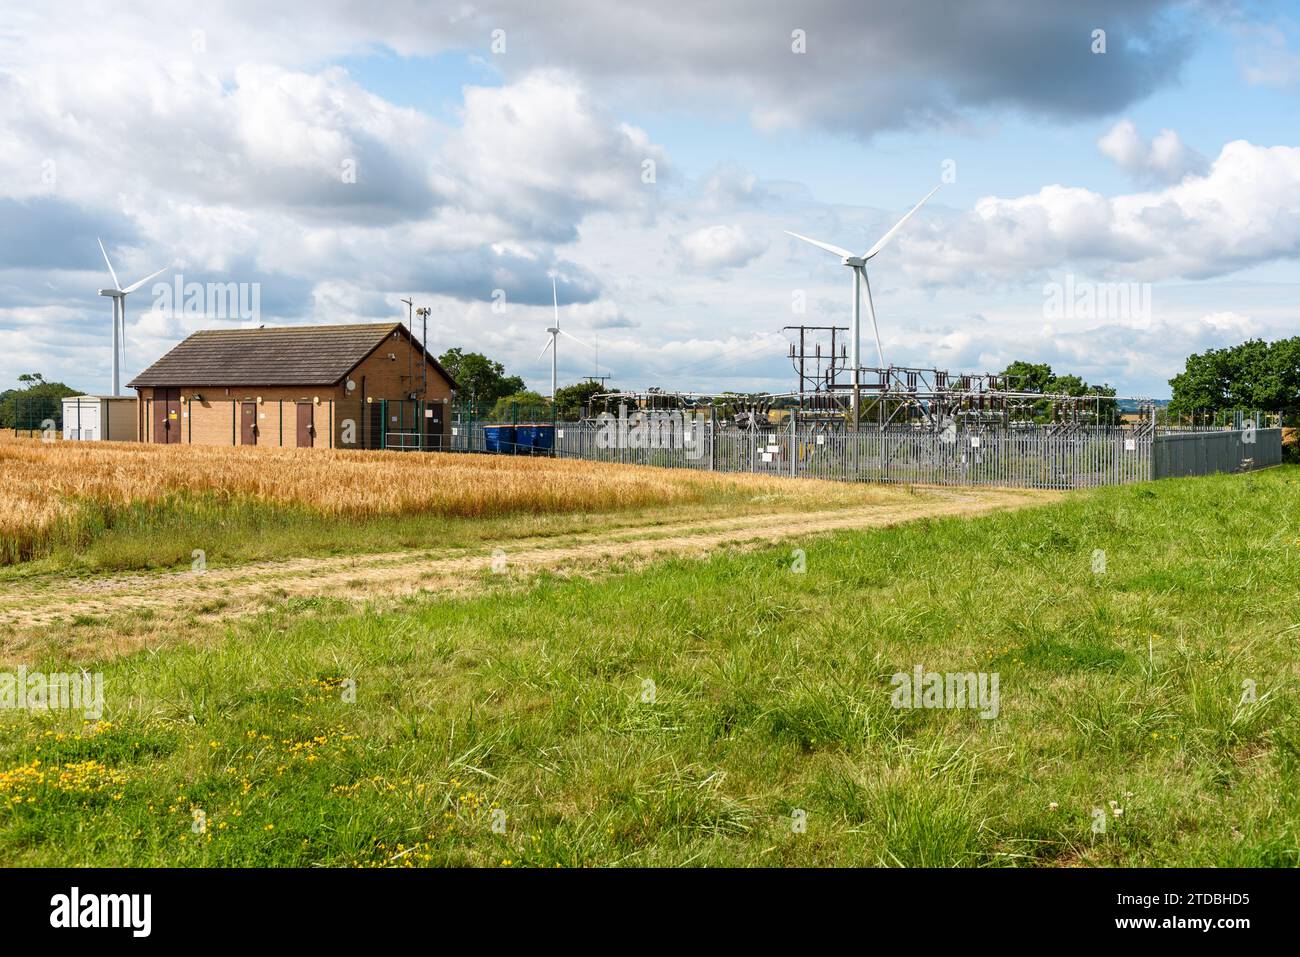 Electrical substation with a wind farm in background in the English countryside on a sunny summer day Stock Photo